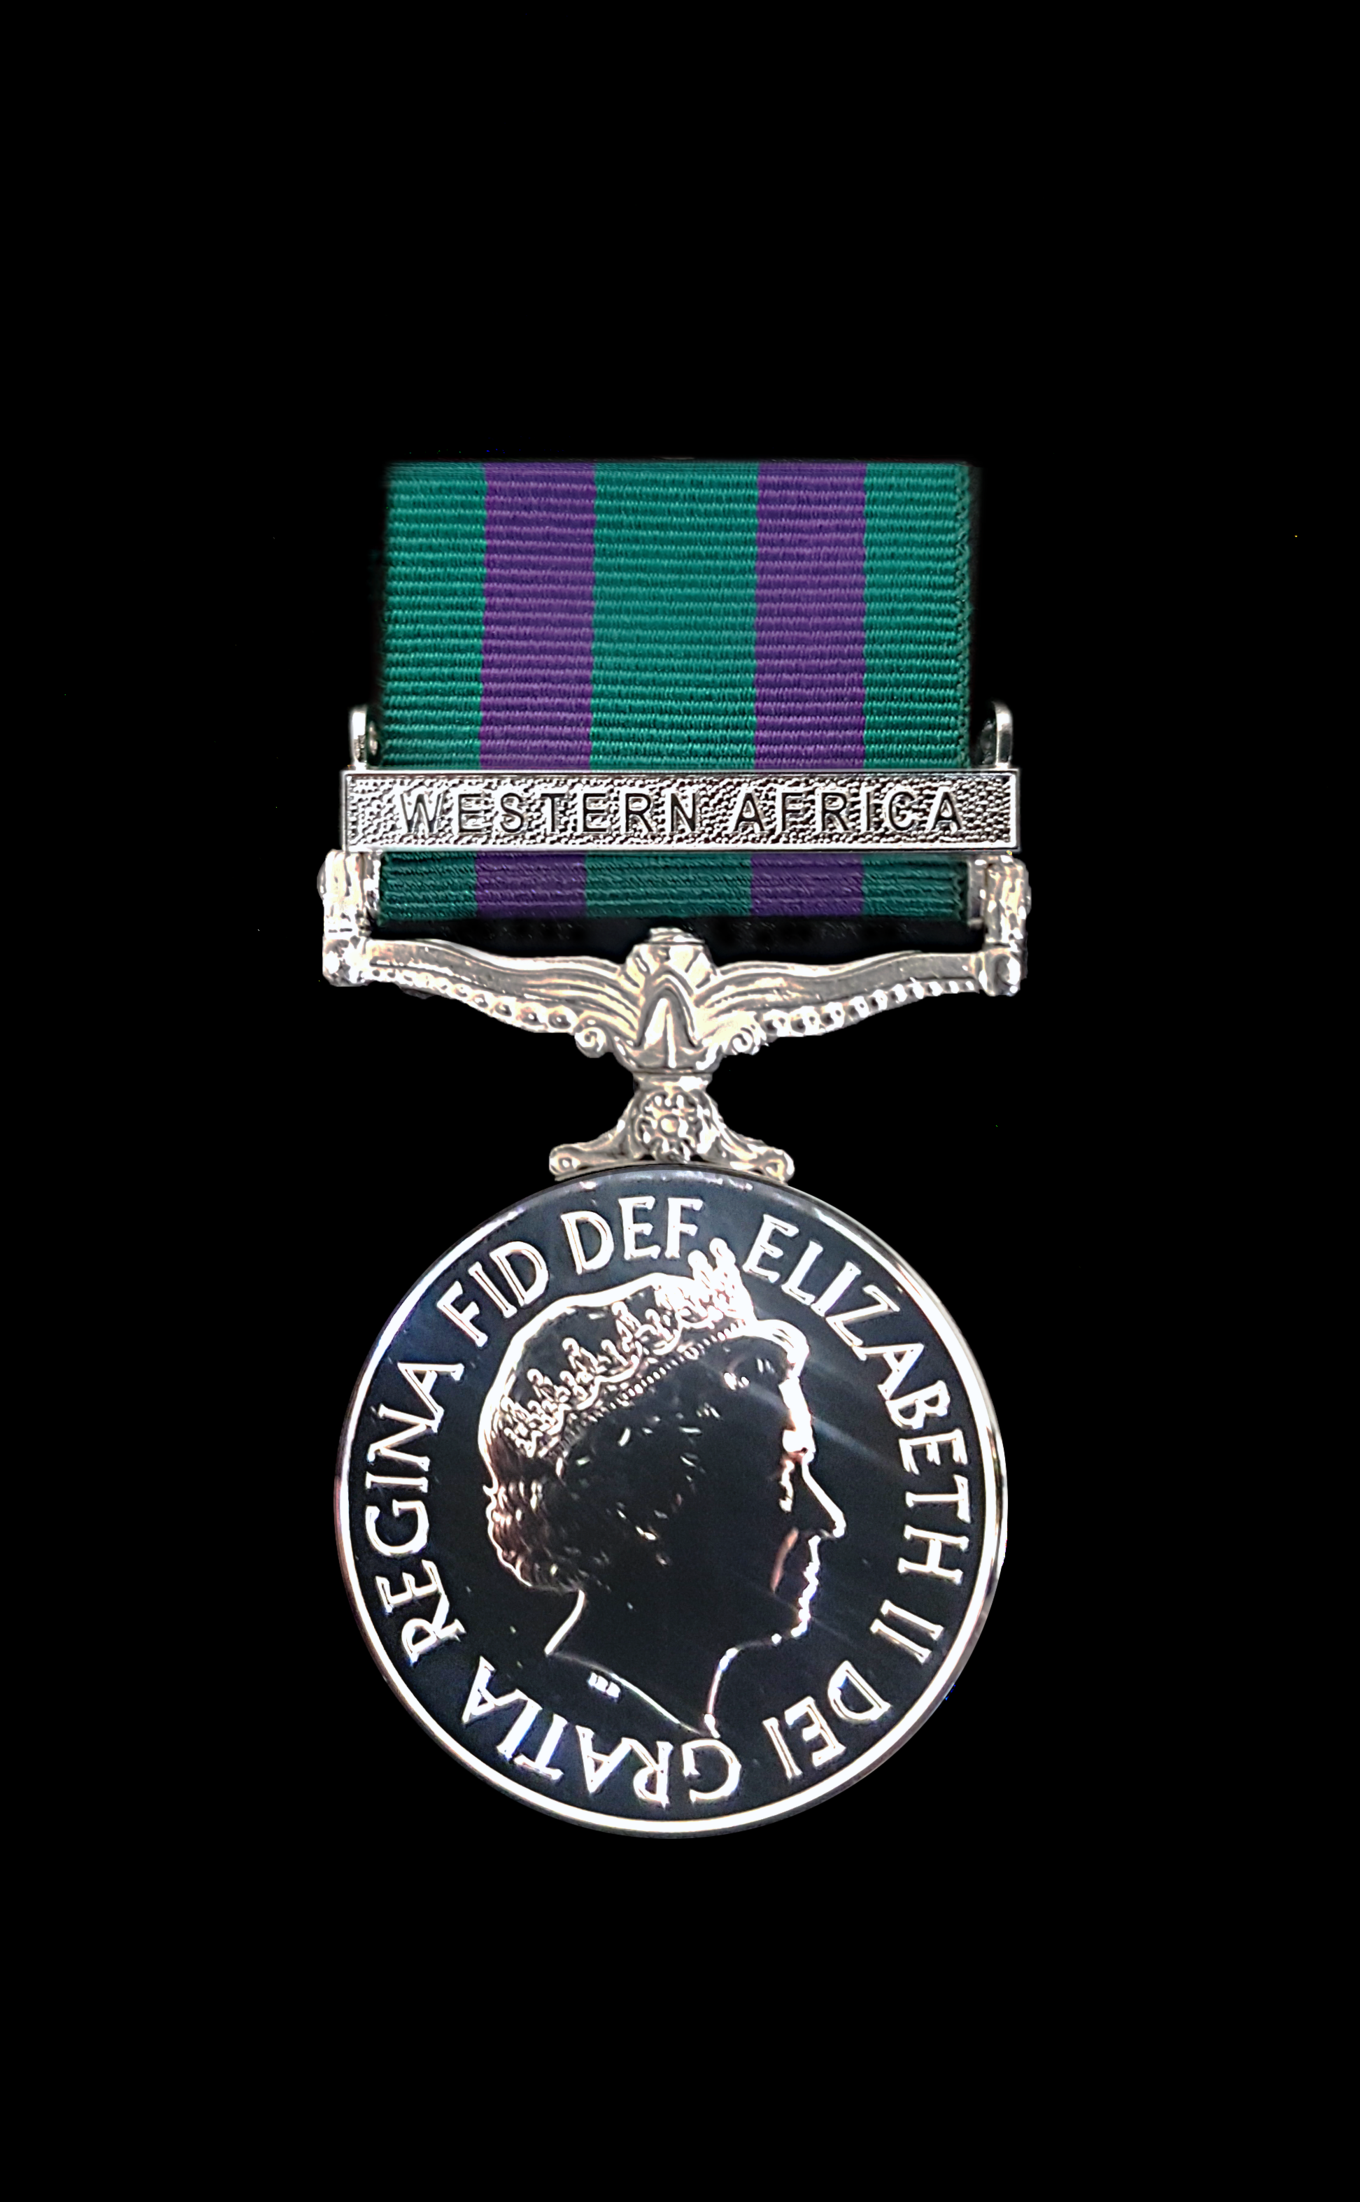 Campaign medal with Her Majesty Queen Elizabeth and clasp 'Western Africa'.